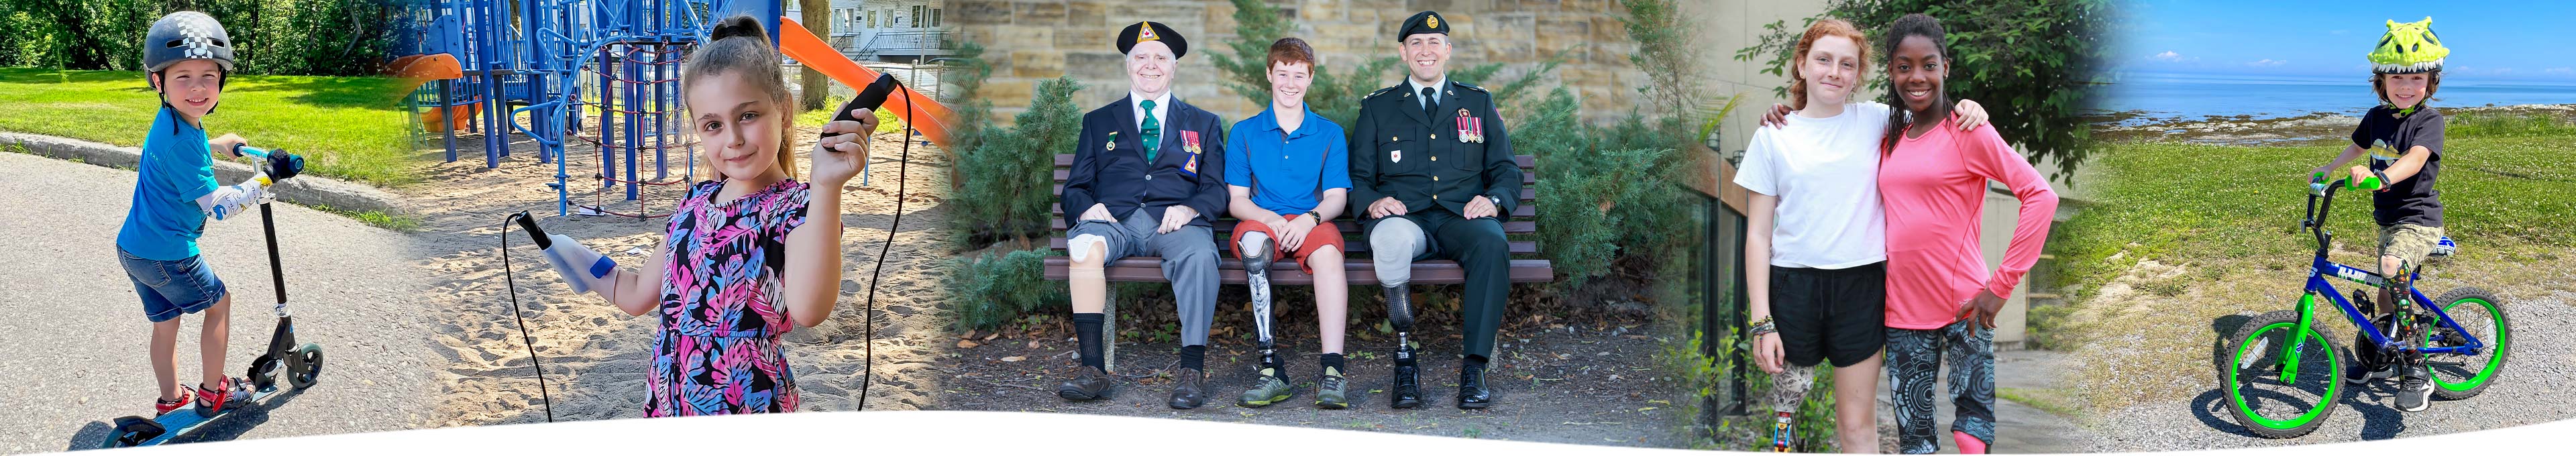 A collection of images showing amputees of all ages playing sports or doing activities, as well as a photo of two war amputee veterans.